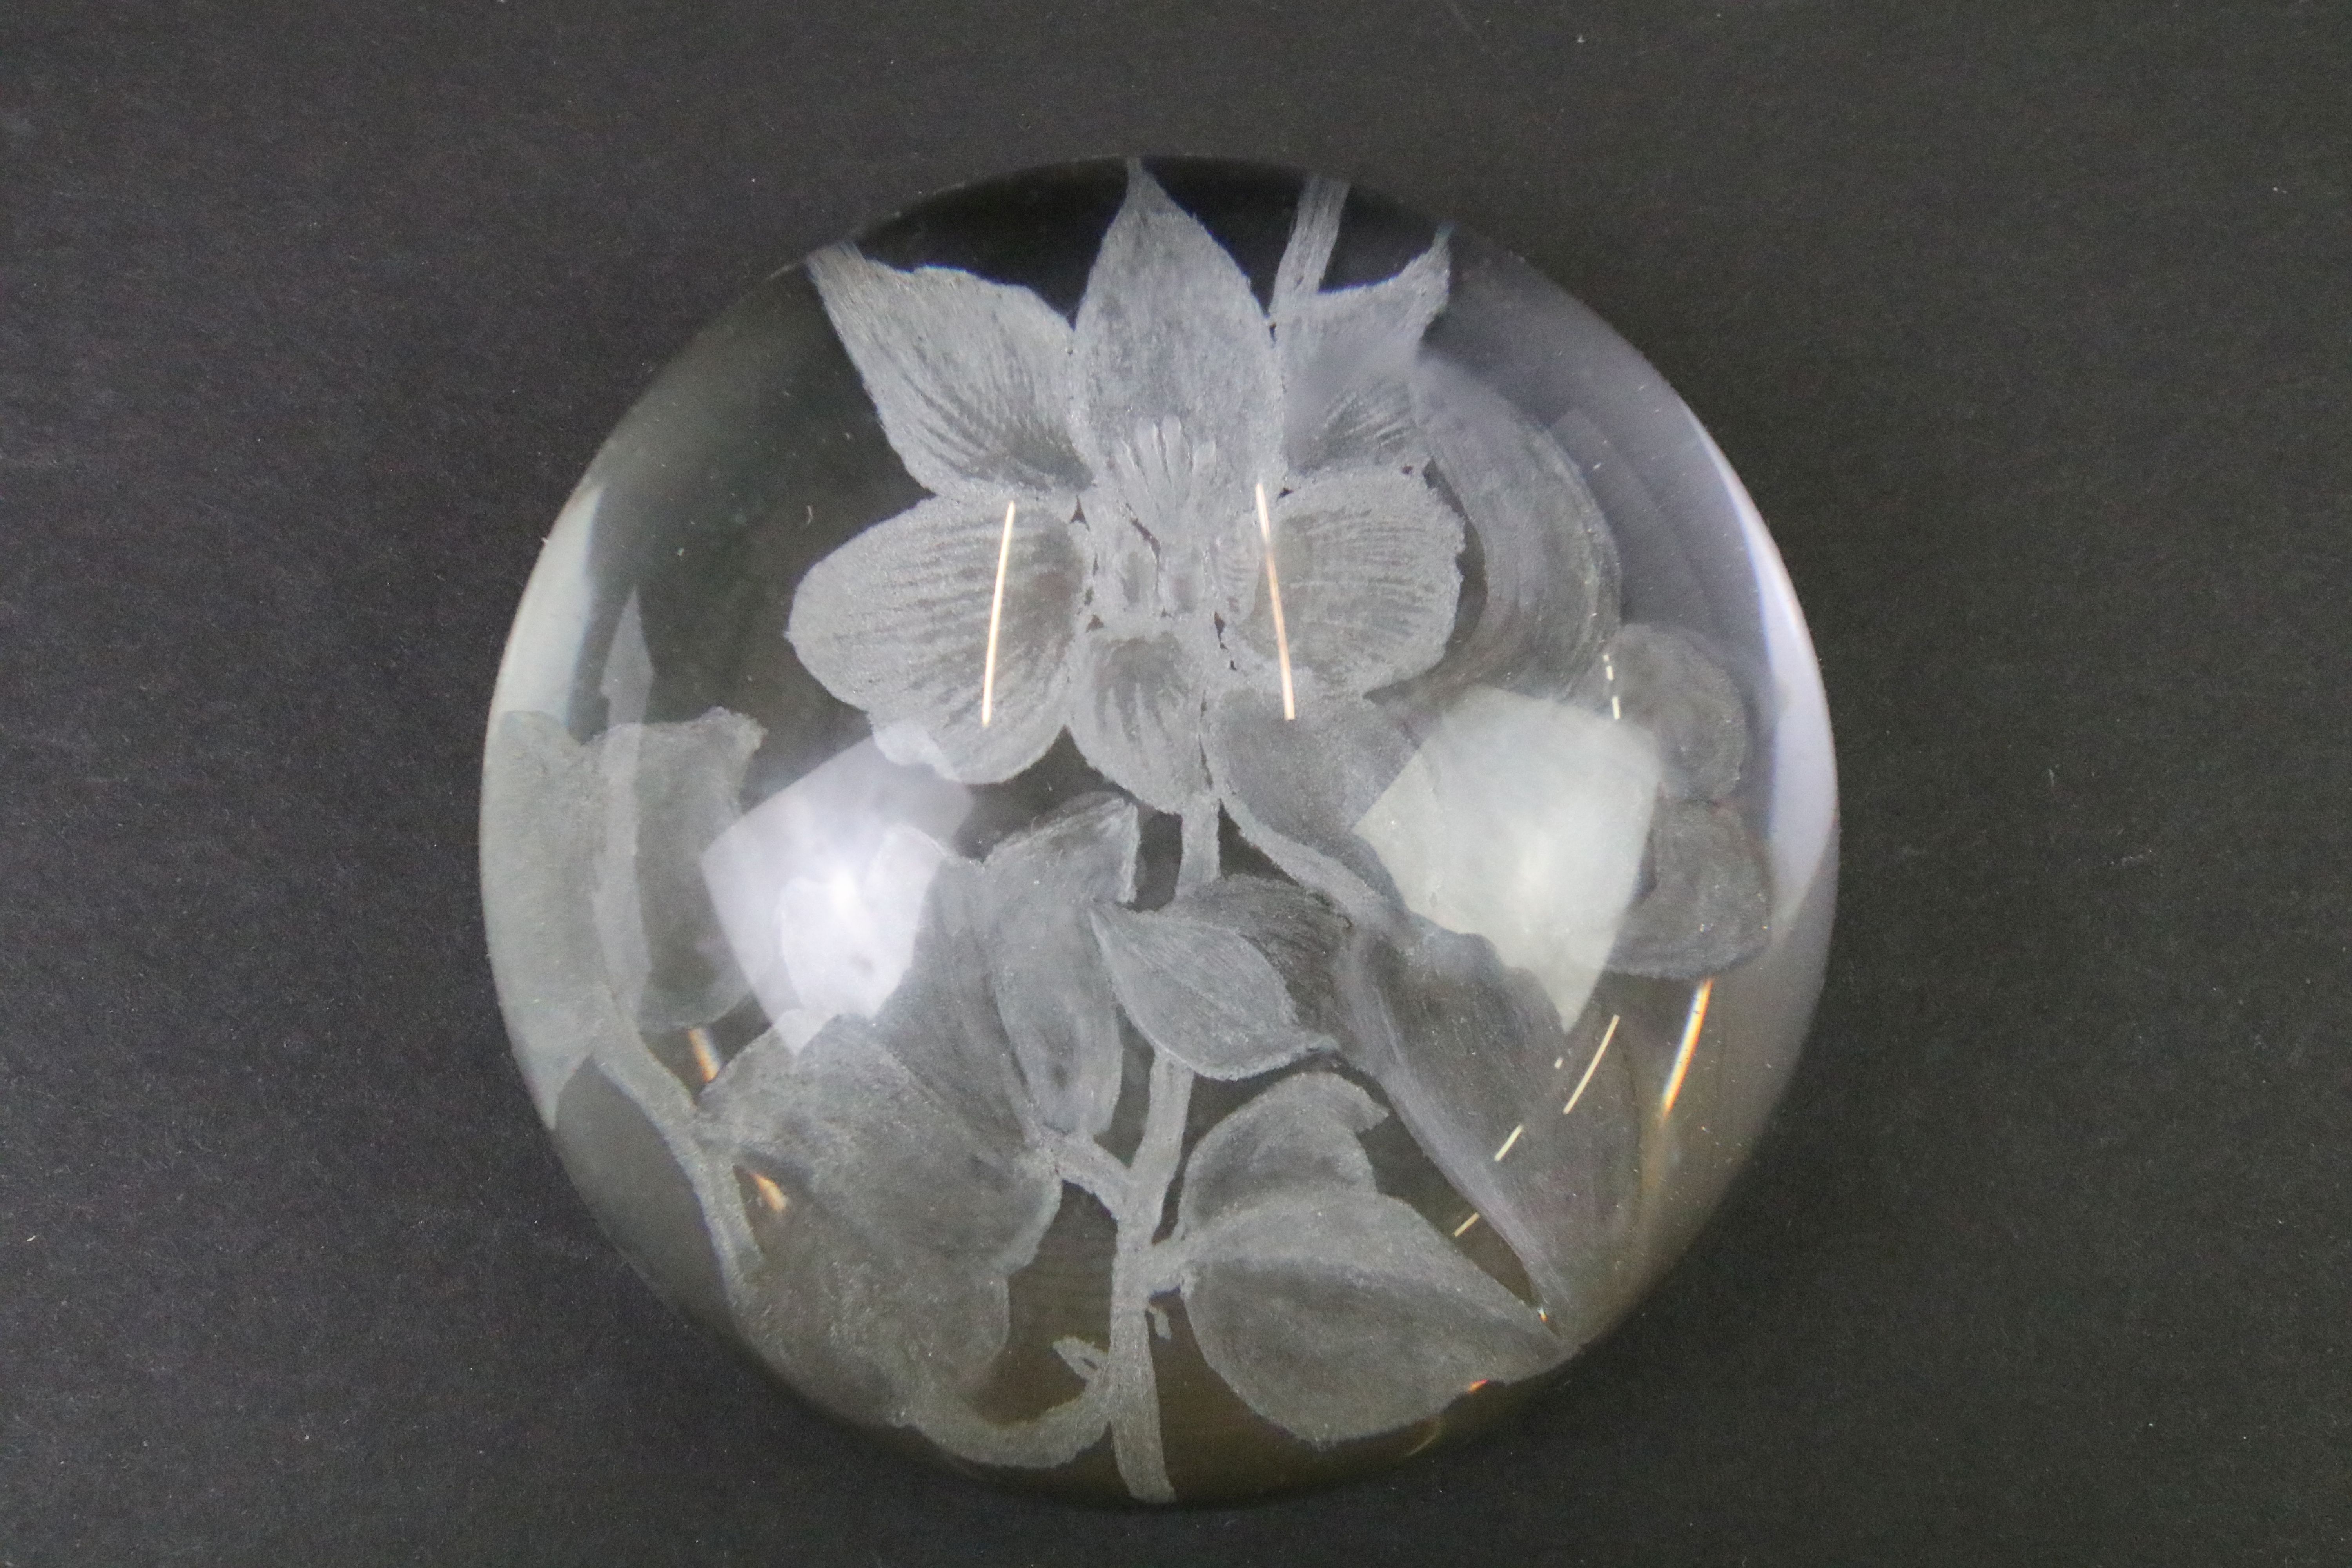 Collection of ten 20th century glass paperweights to include two iridescent glass examples (swan & - Image 7 of 9